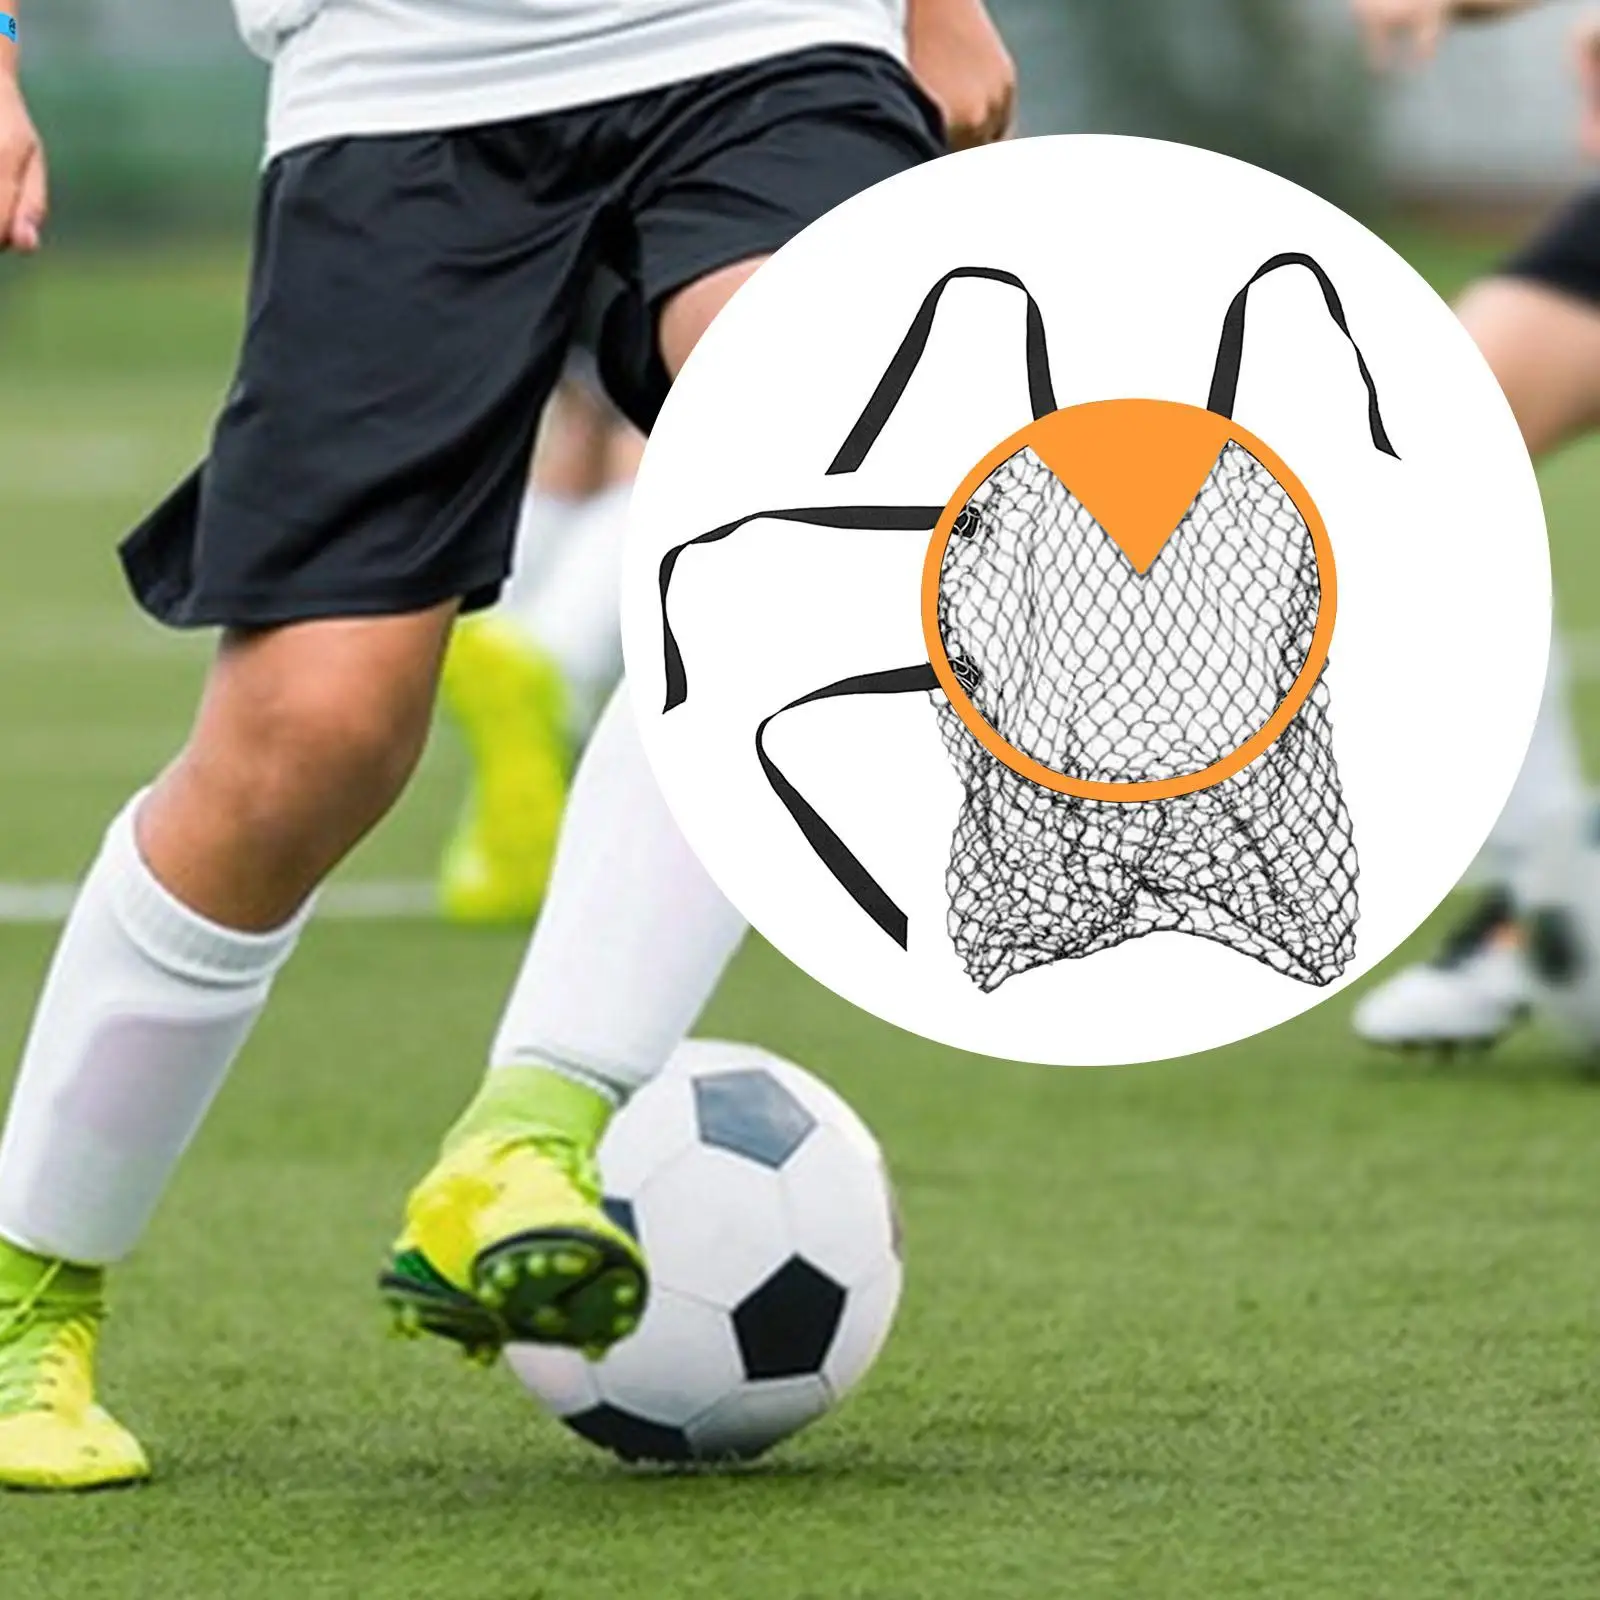 

Soccer Goal Target Net Adjustable Straps with Buckles Dia.17.7" Football Accessories Football Training Net Soccer Training Net